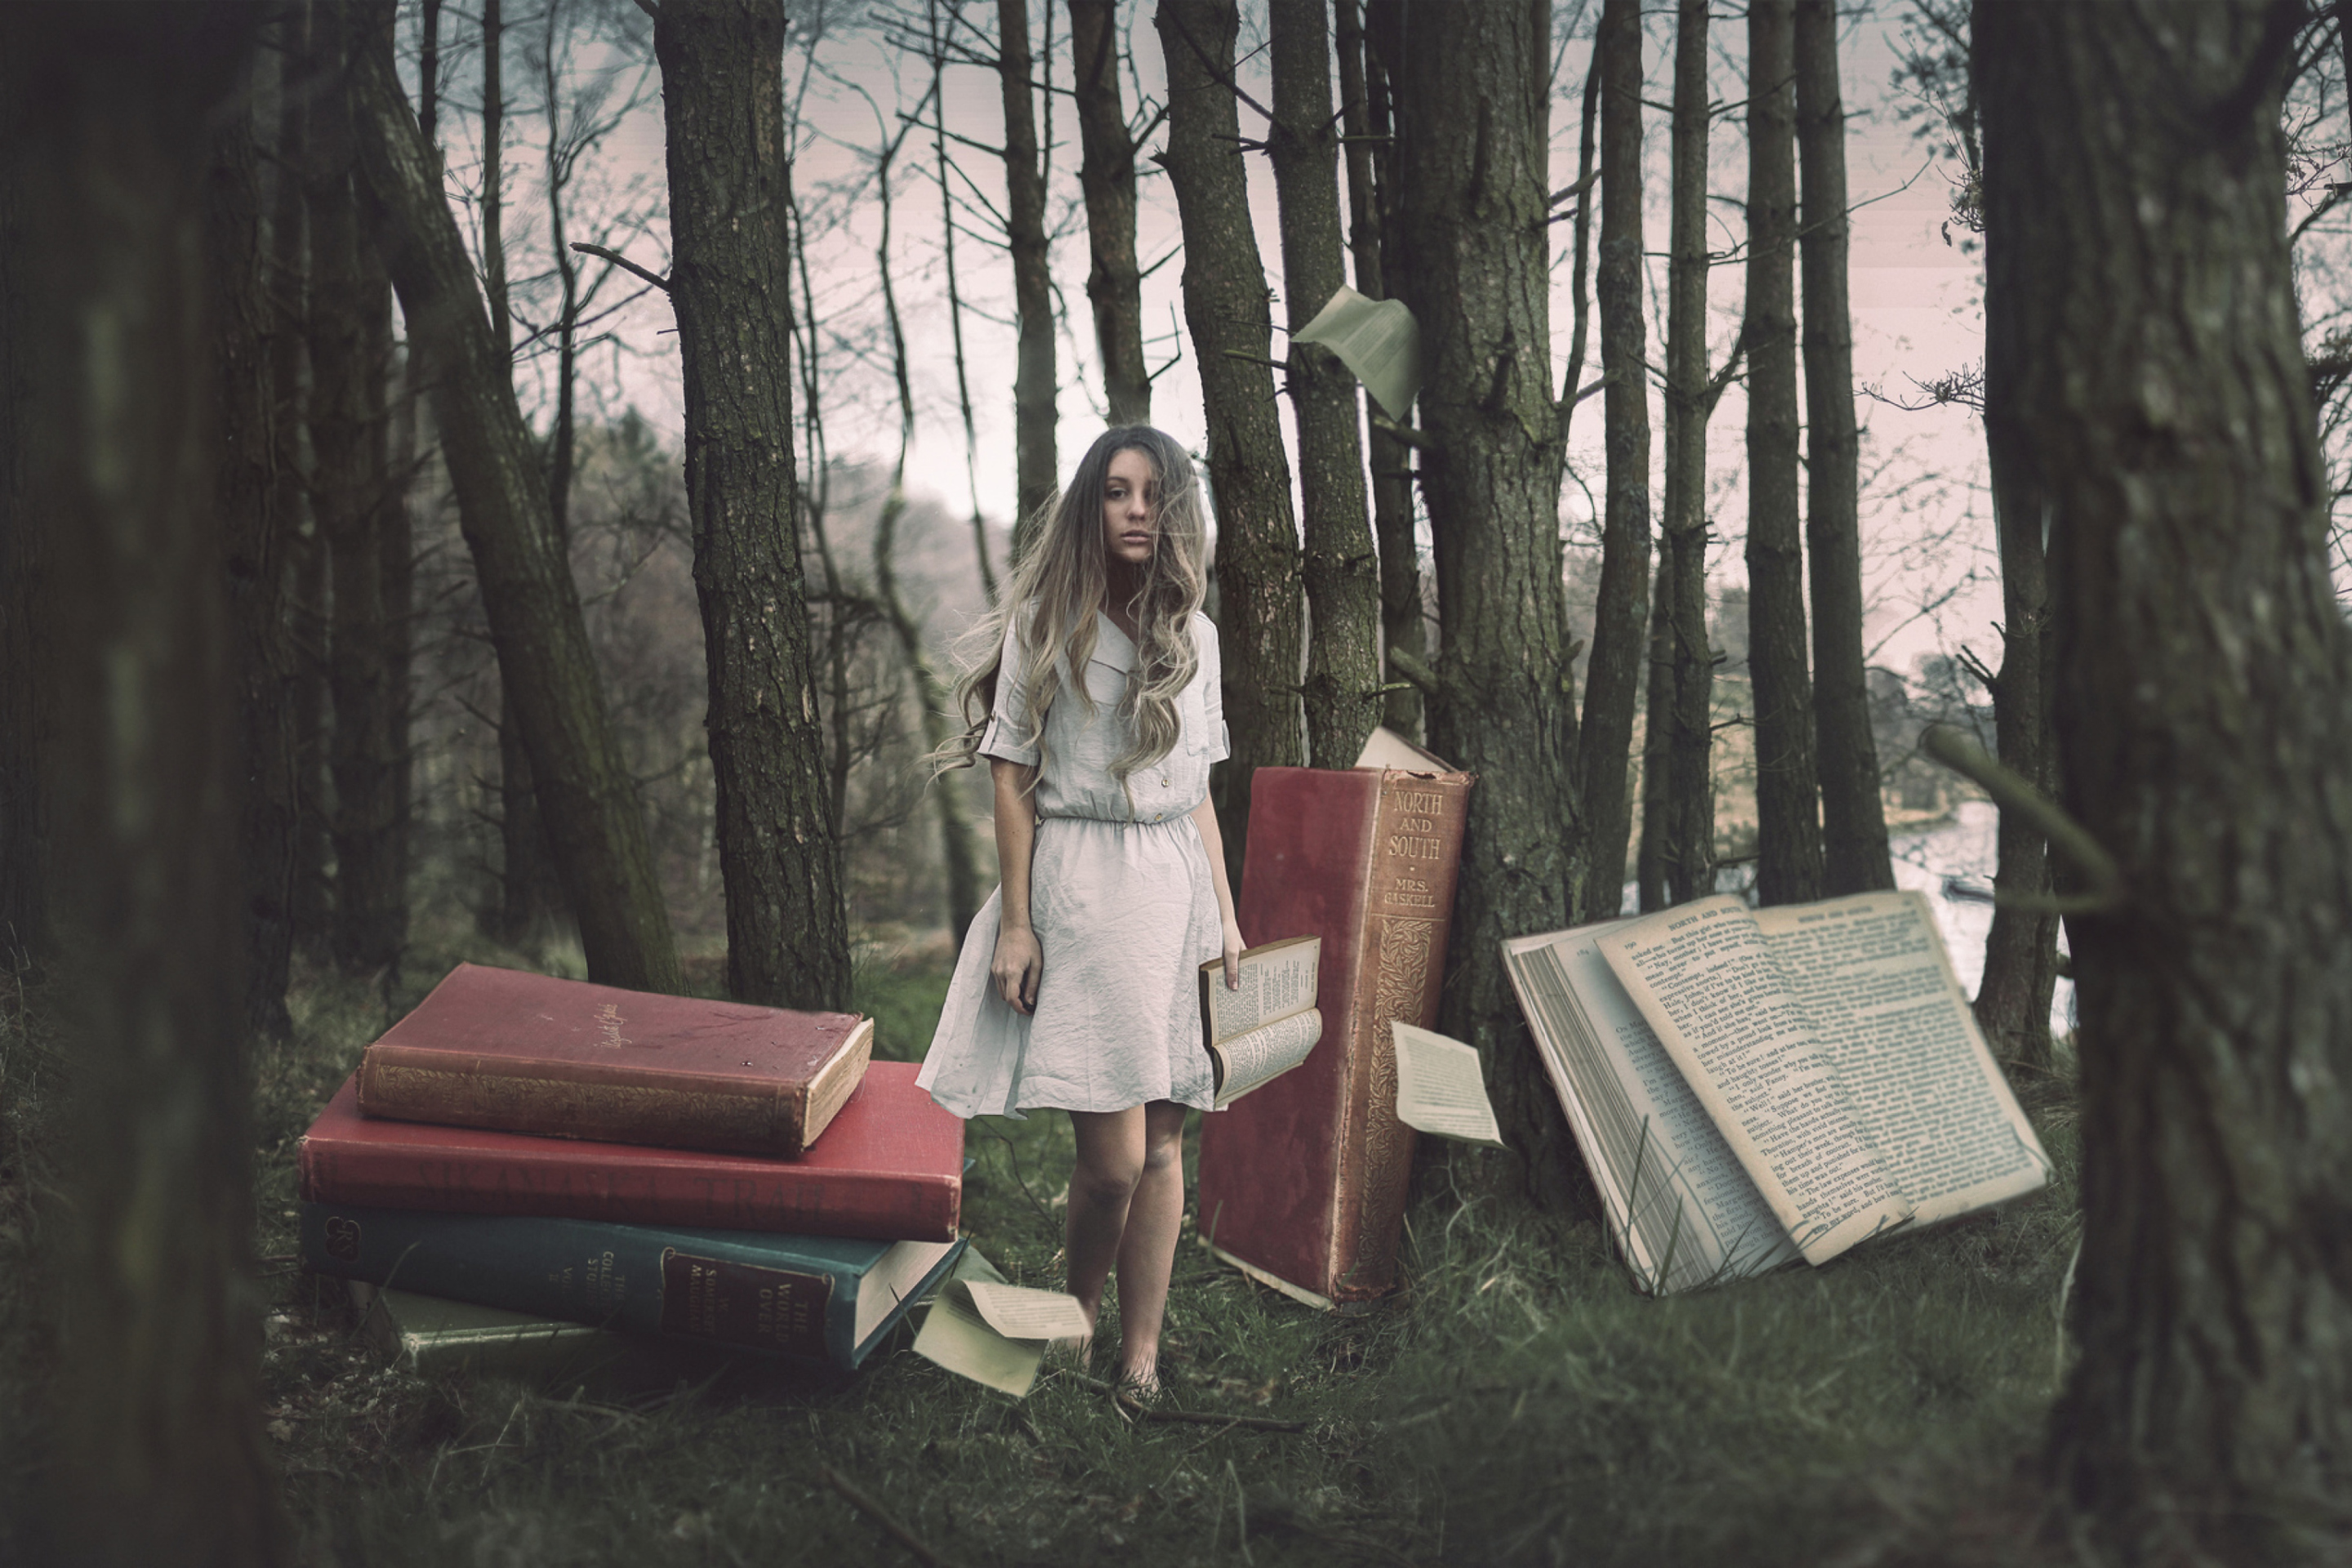 Forest Nymph Surrounded By Books wallpaper 2880x1920